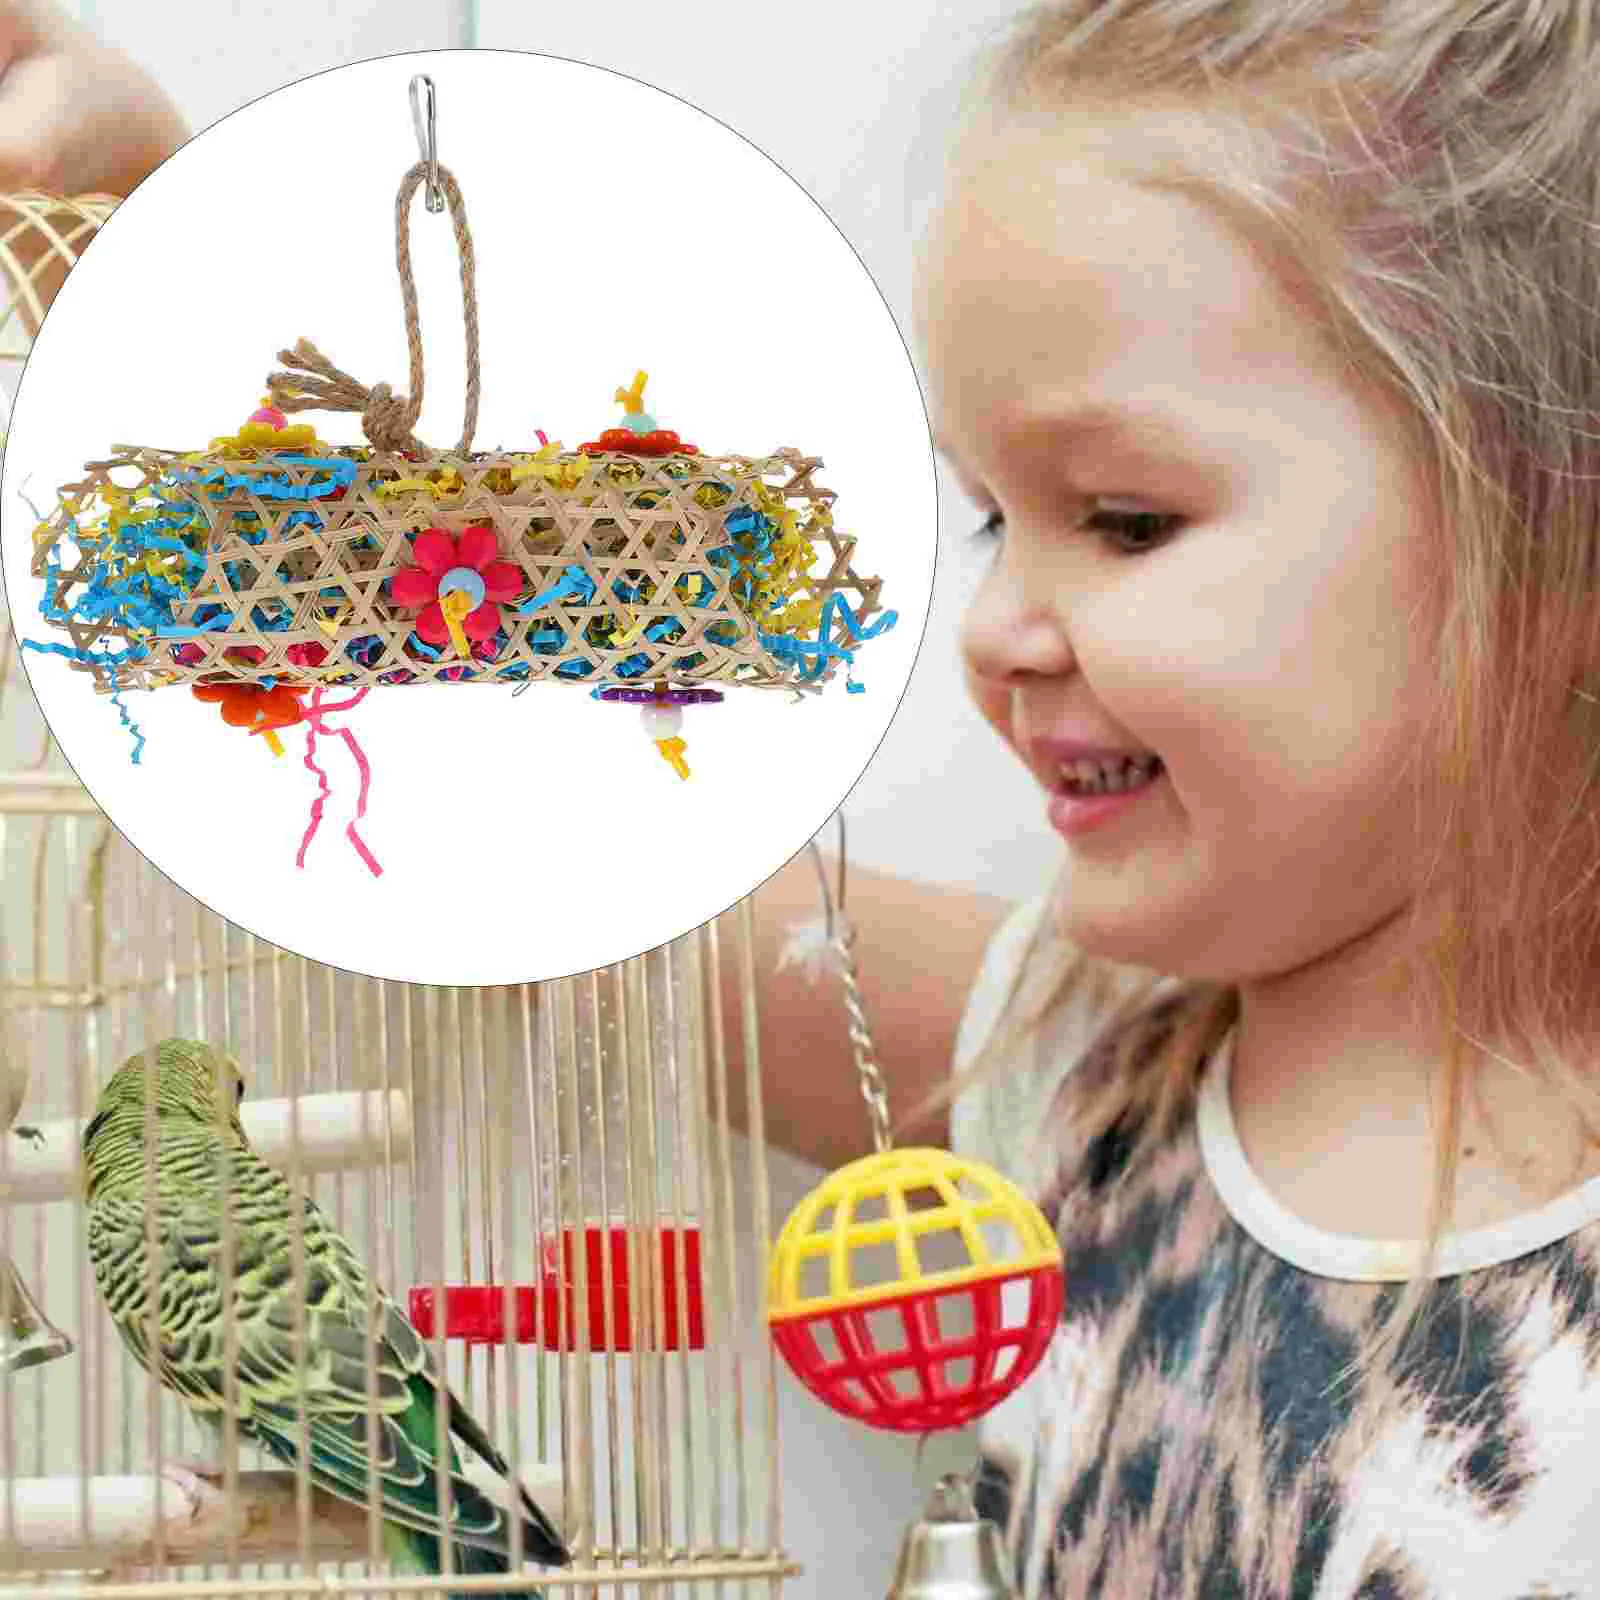 

Parrot Toy Toys Chewing Hanging Shredder Cage Bird Plaything Bite Biting Birds Swing Shred Parrots Chew Hammock Teeth Grinding